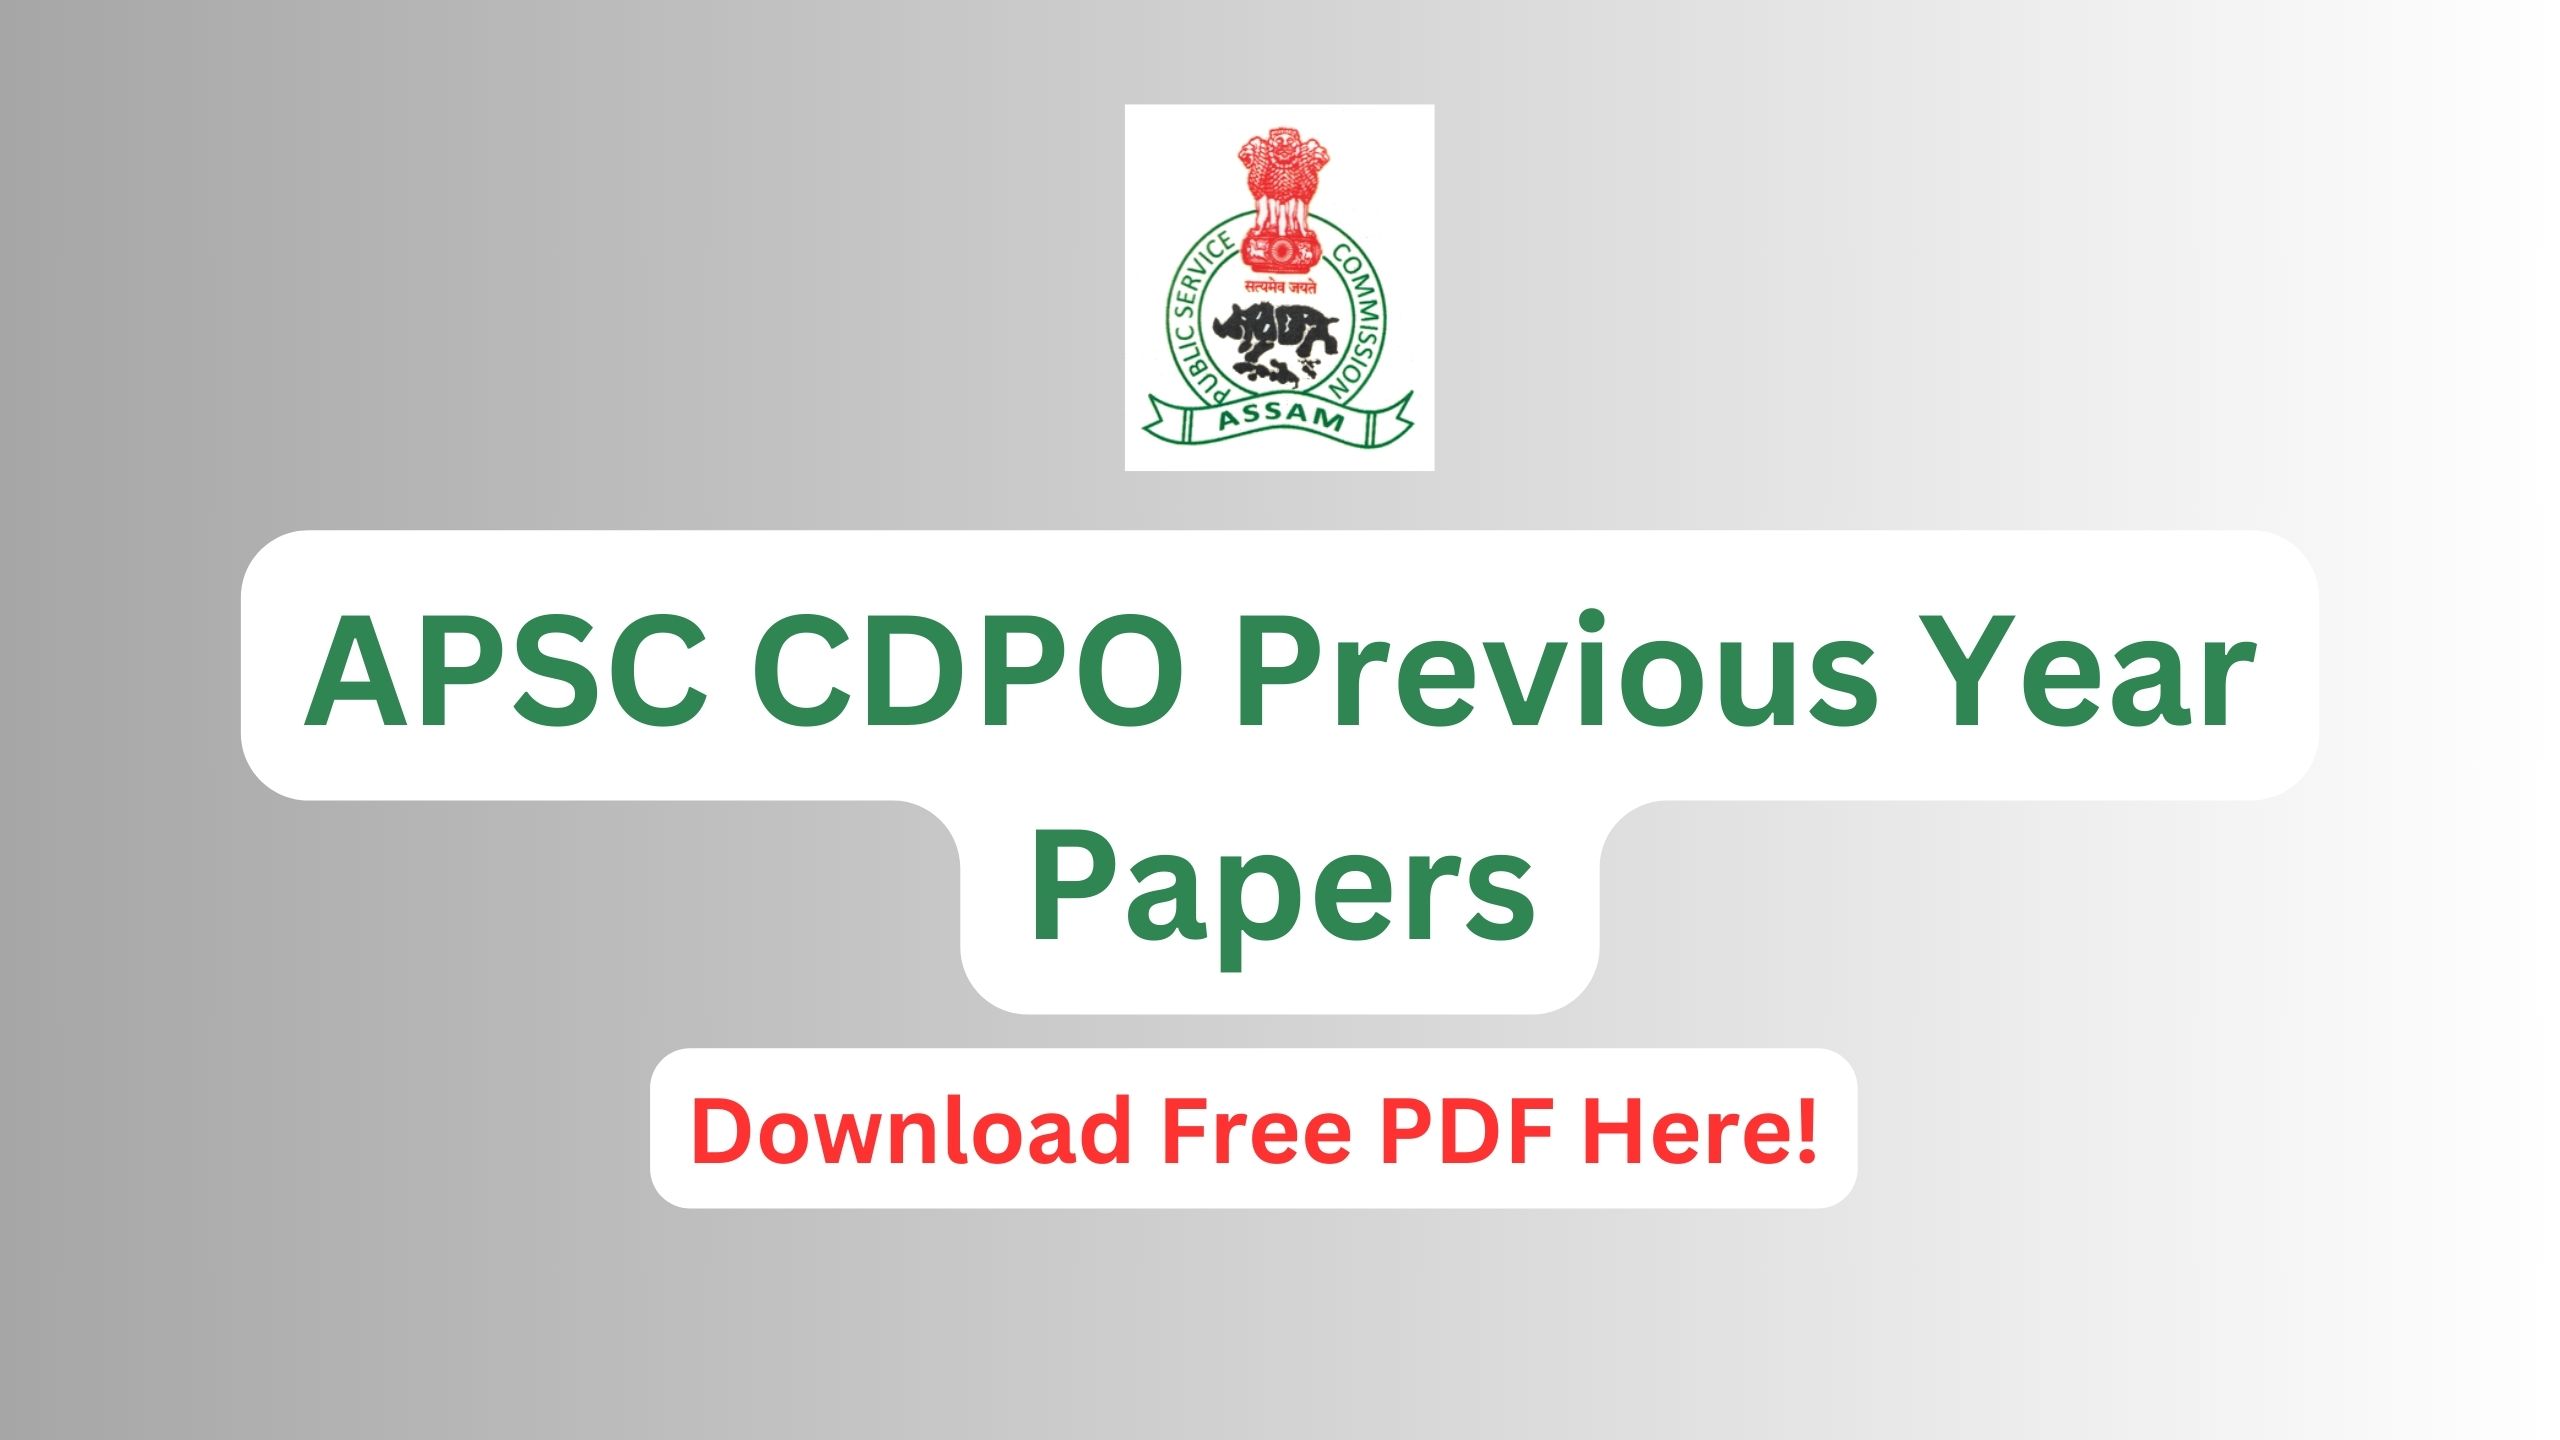 APSC CDPO Previous Year Papers